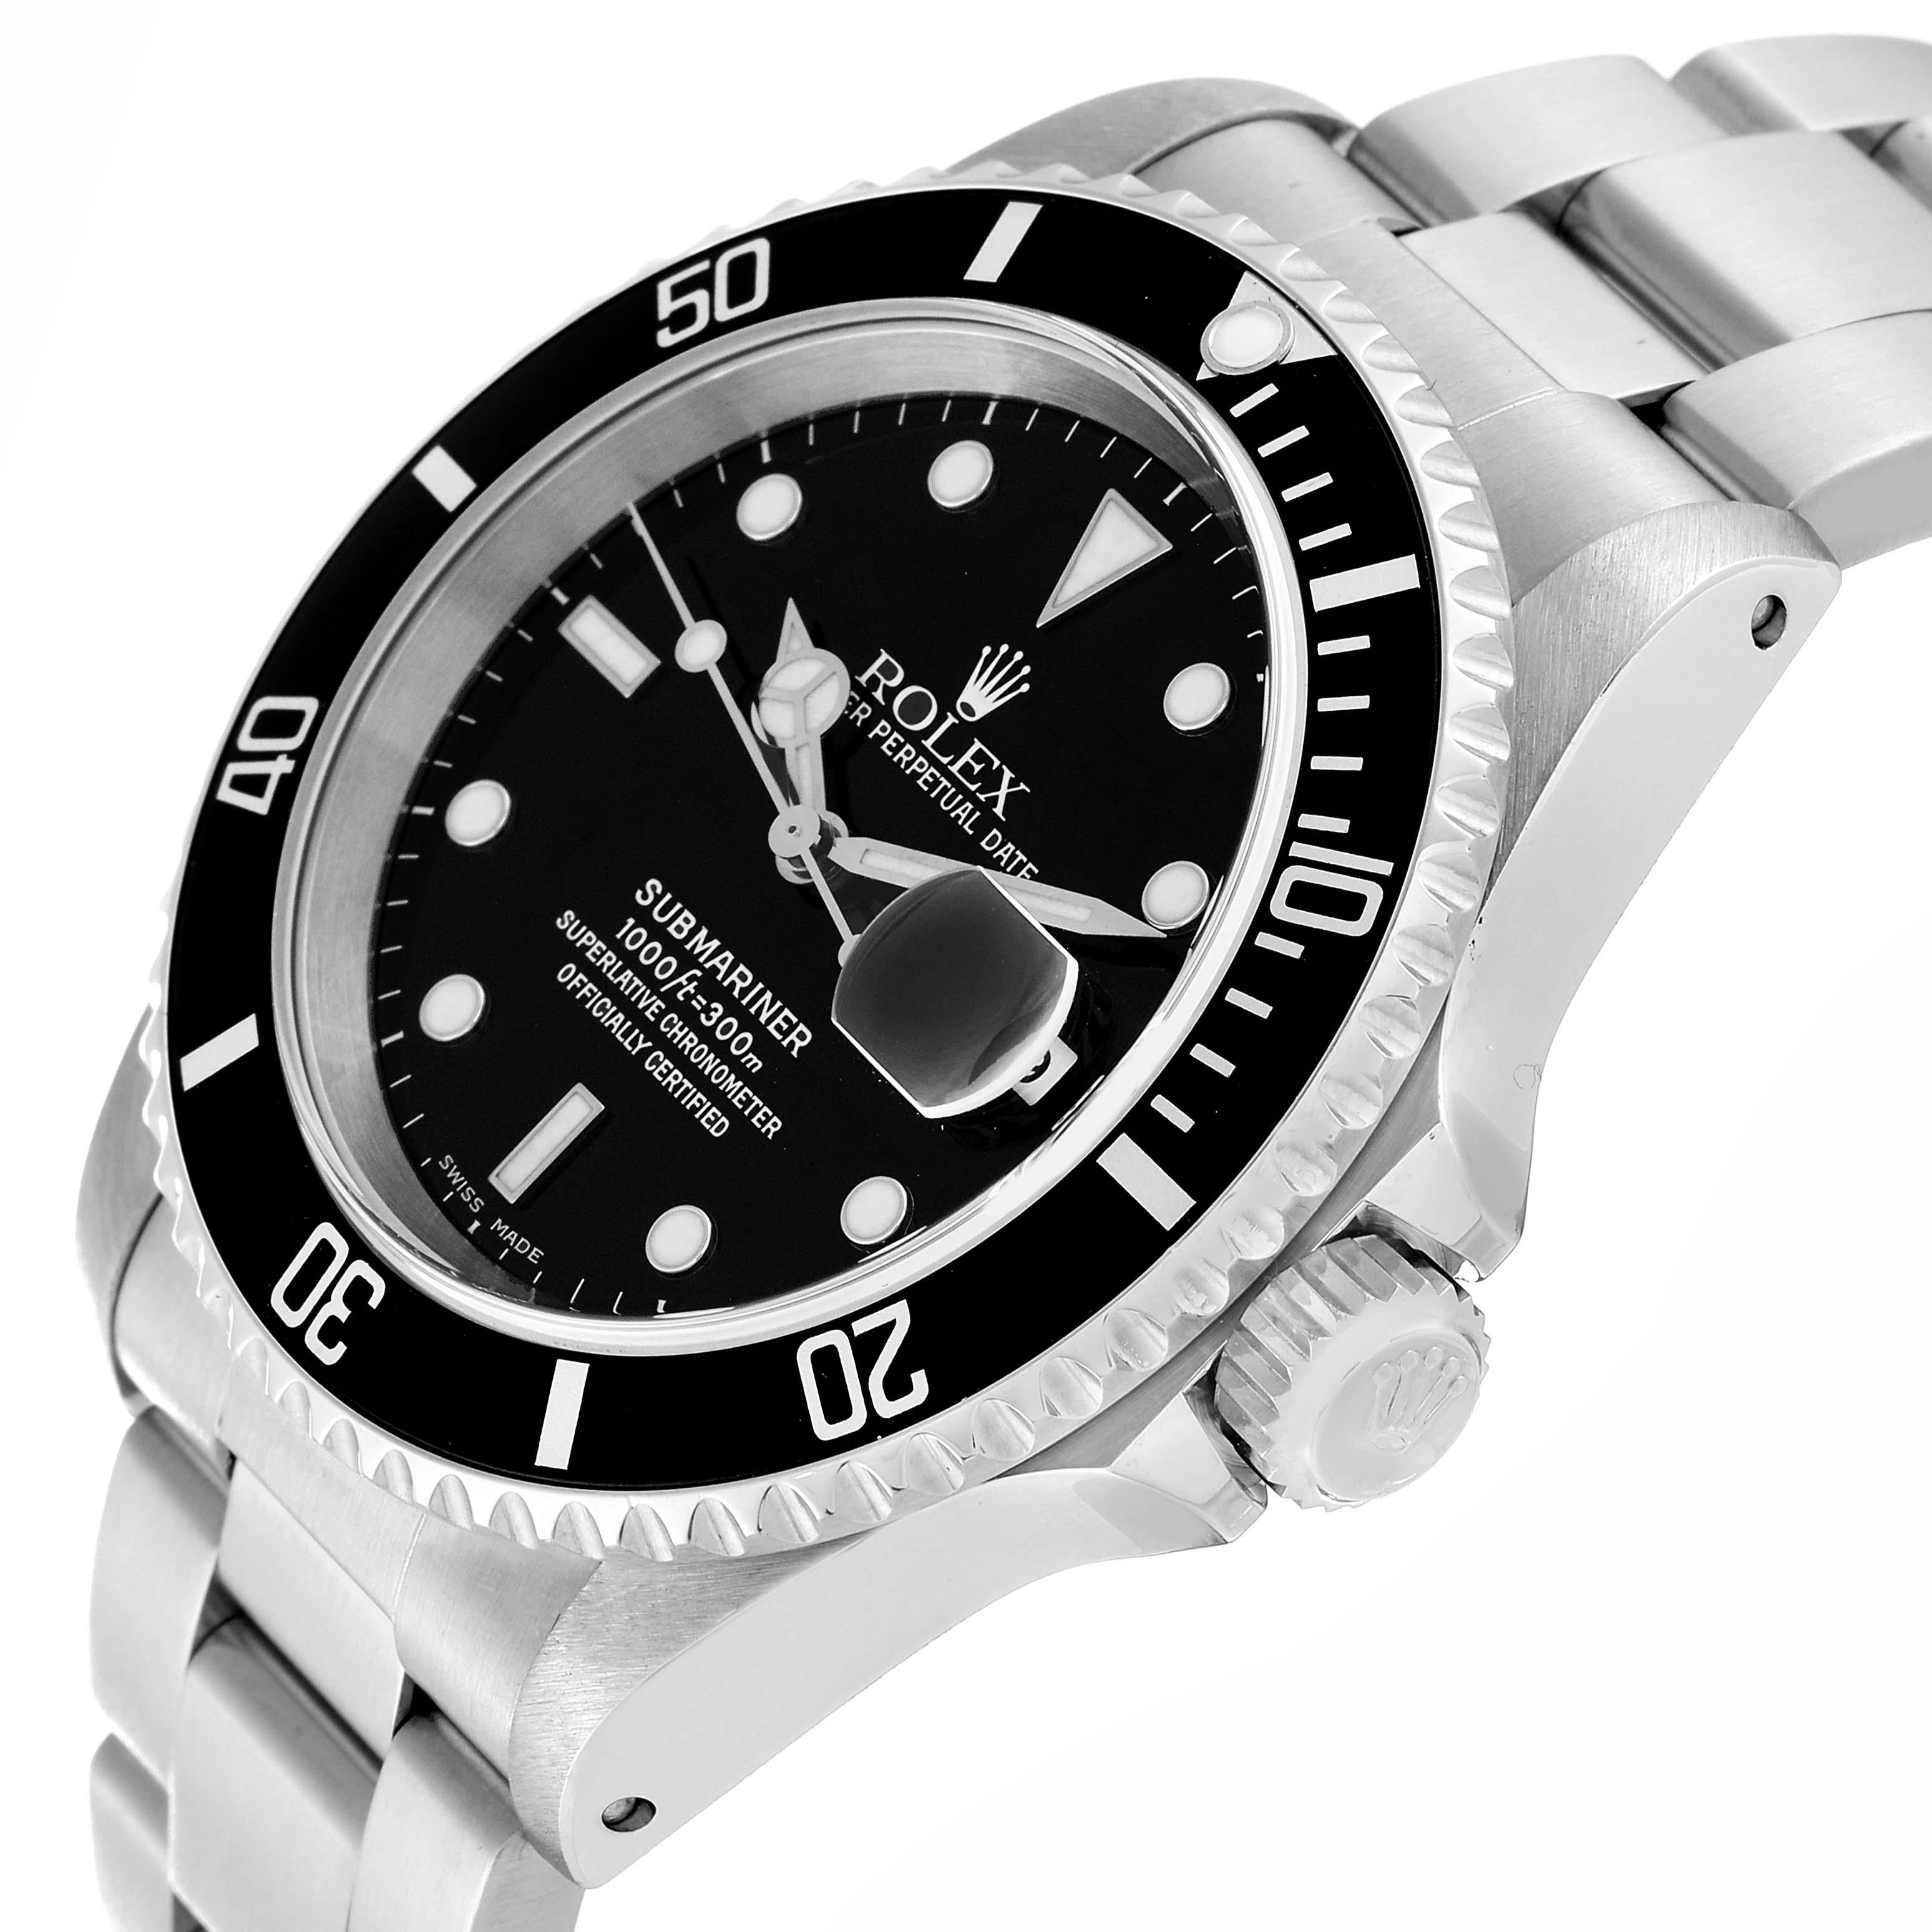 Rolex Submariner Date Black Dial Steel Mens Watch 16610 Box Papers 4